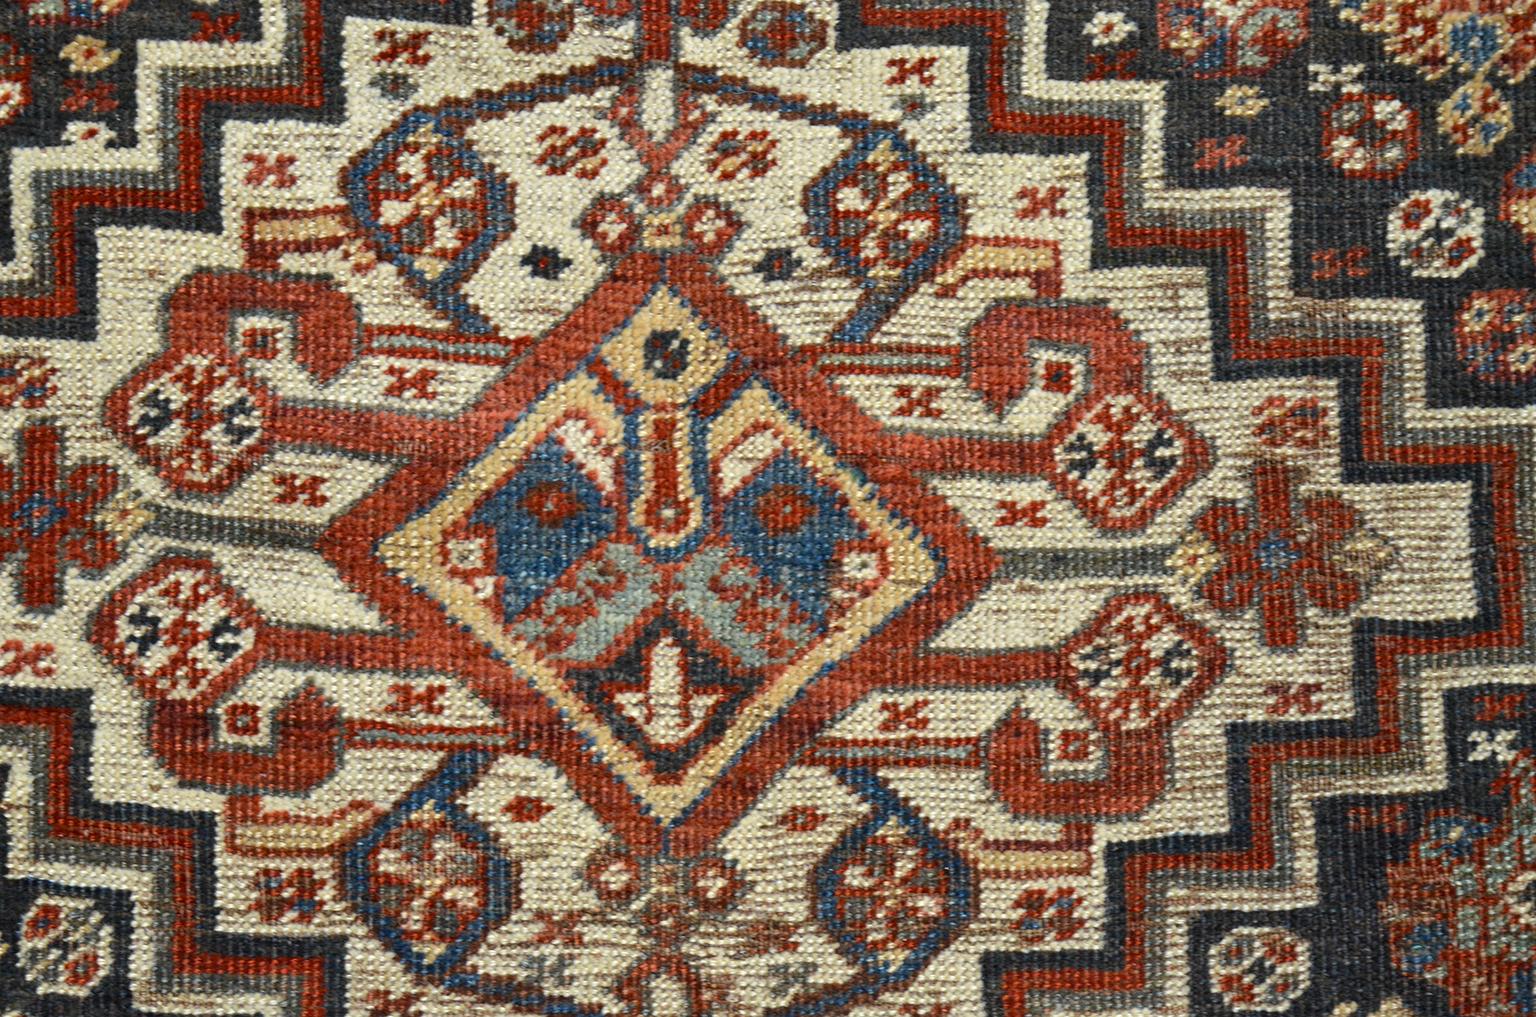 Other Antique 1880s Persian Qashqai Rug, Wool, Orange, Cream, Blue, 5' x 6' For Sale